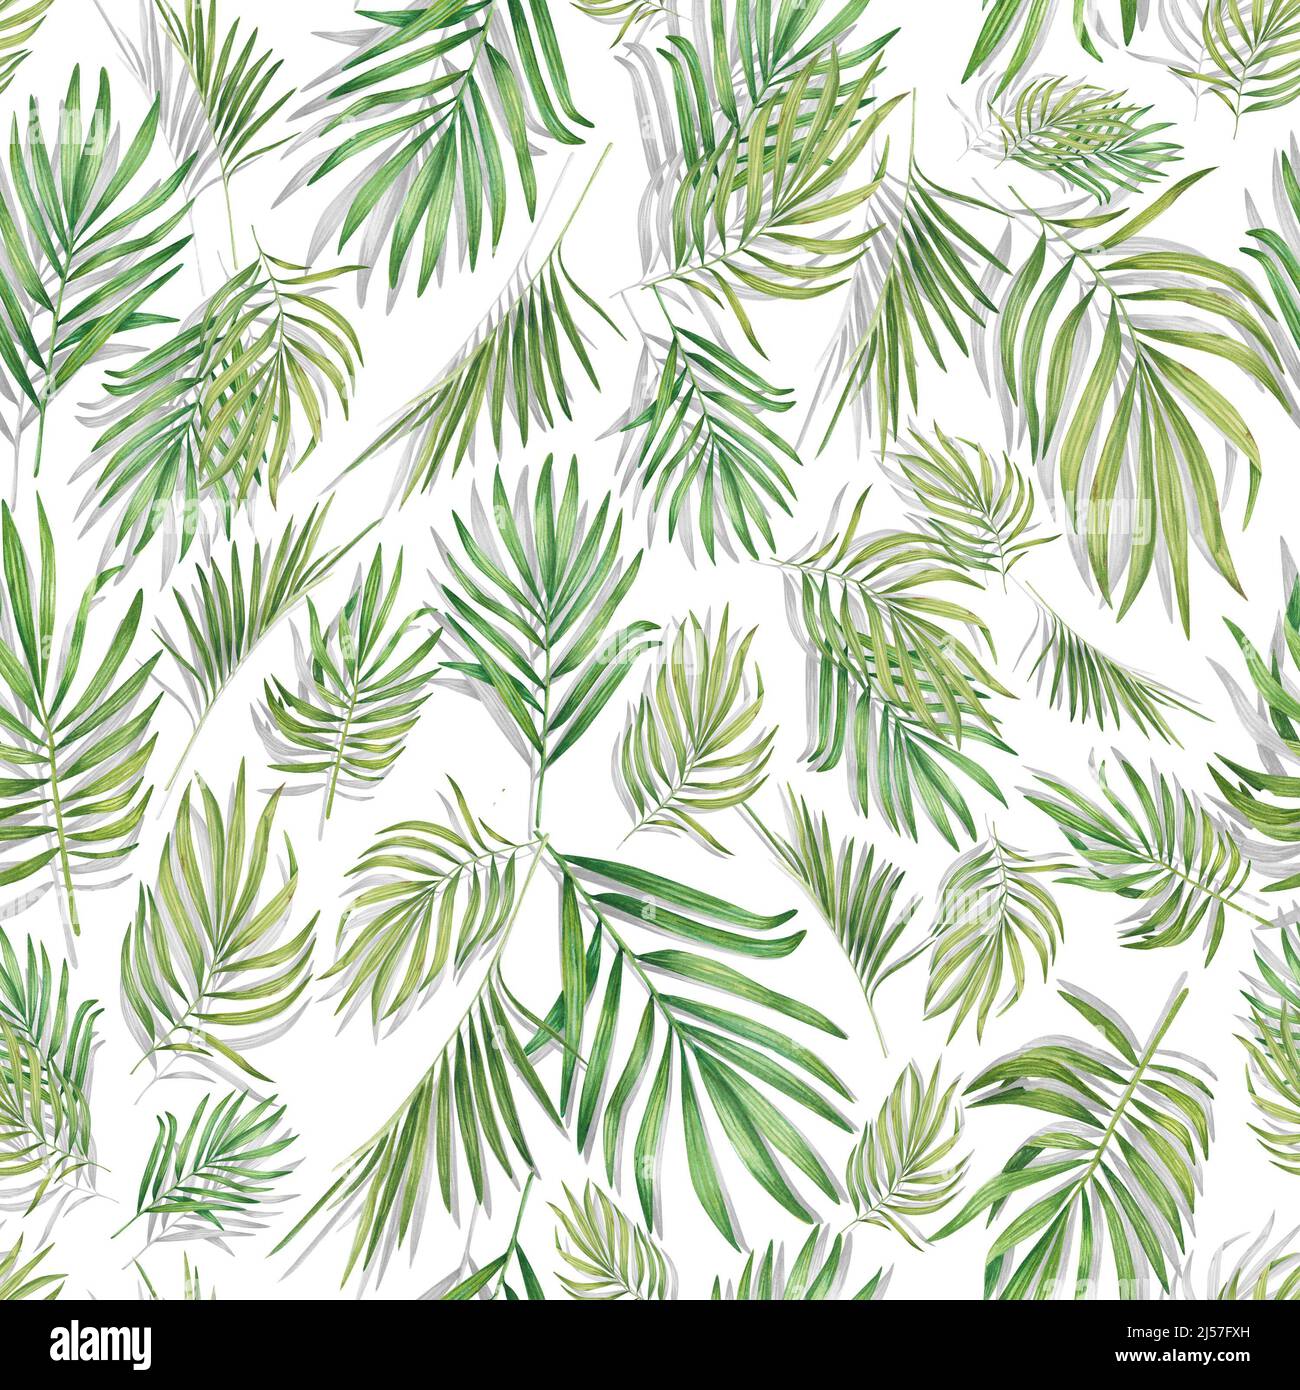 Tropical seamless pattern with palm leaves. Watercolor summer print with green plants. Exotic floral illustration is suitable for clothing, textiles, Stock Photo